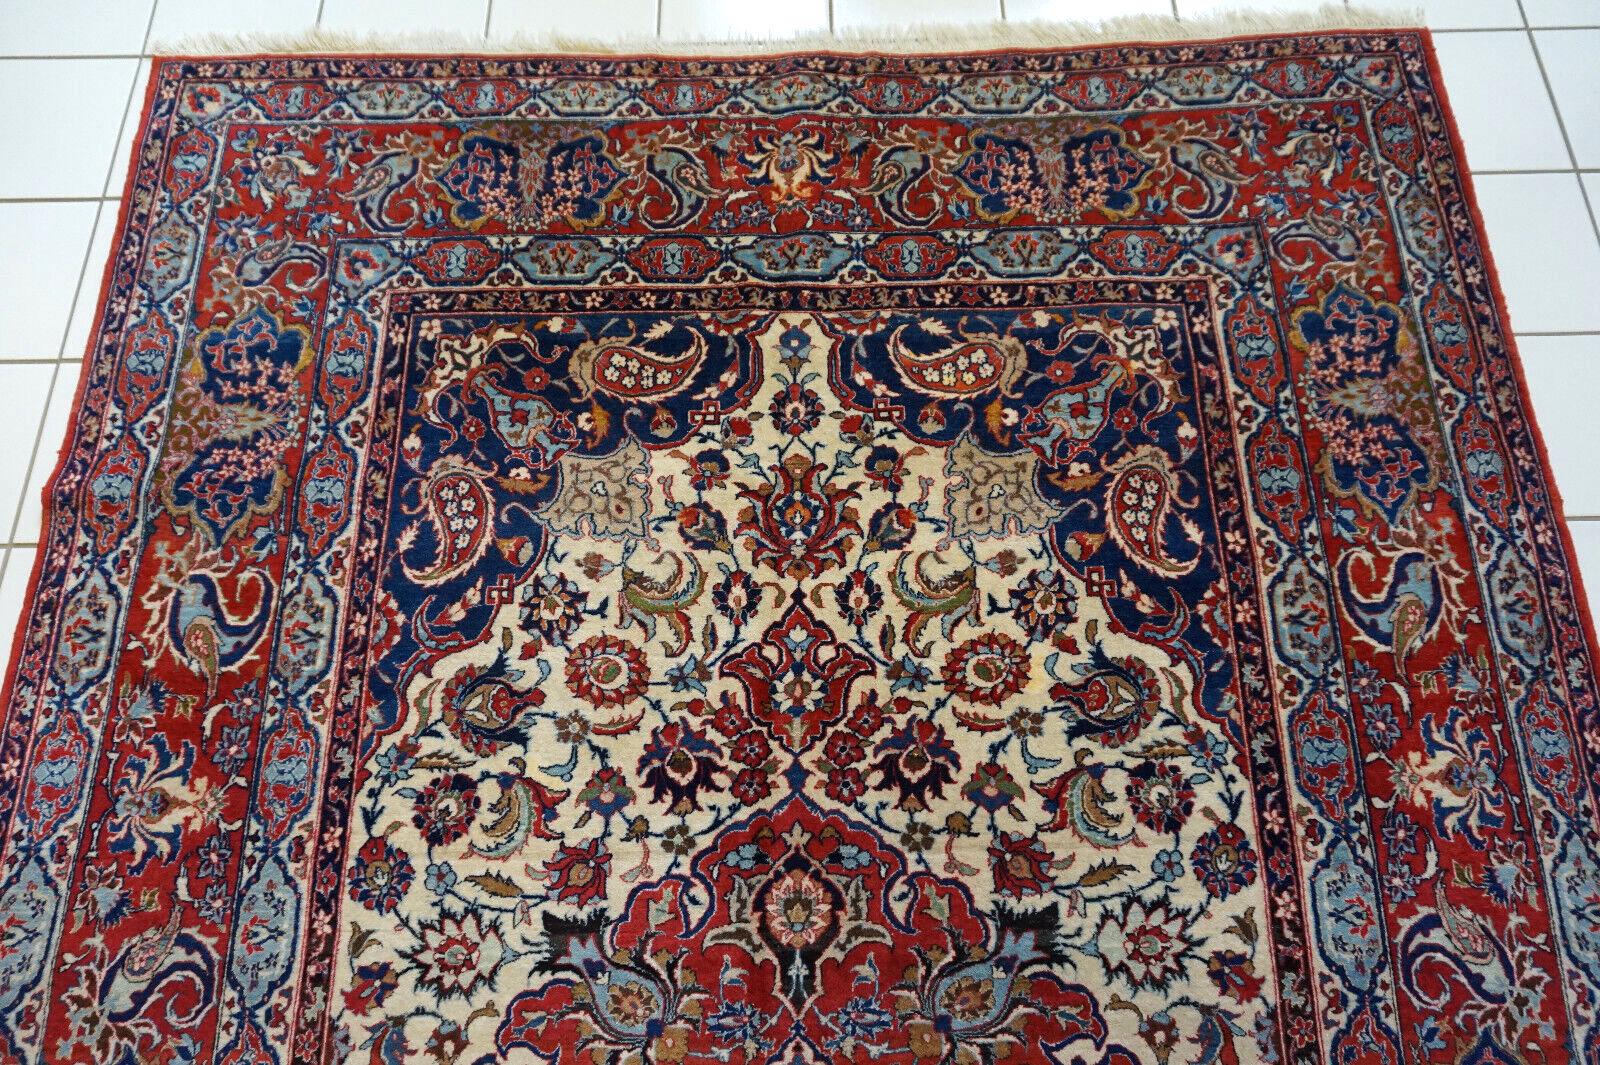 Wool Handmade Antique Persian Style Isfahan Rug 4.5' x 7.7', 1920s - 1D53 For Sale